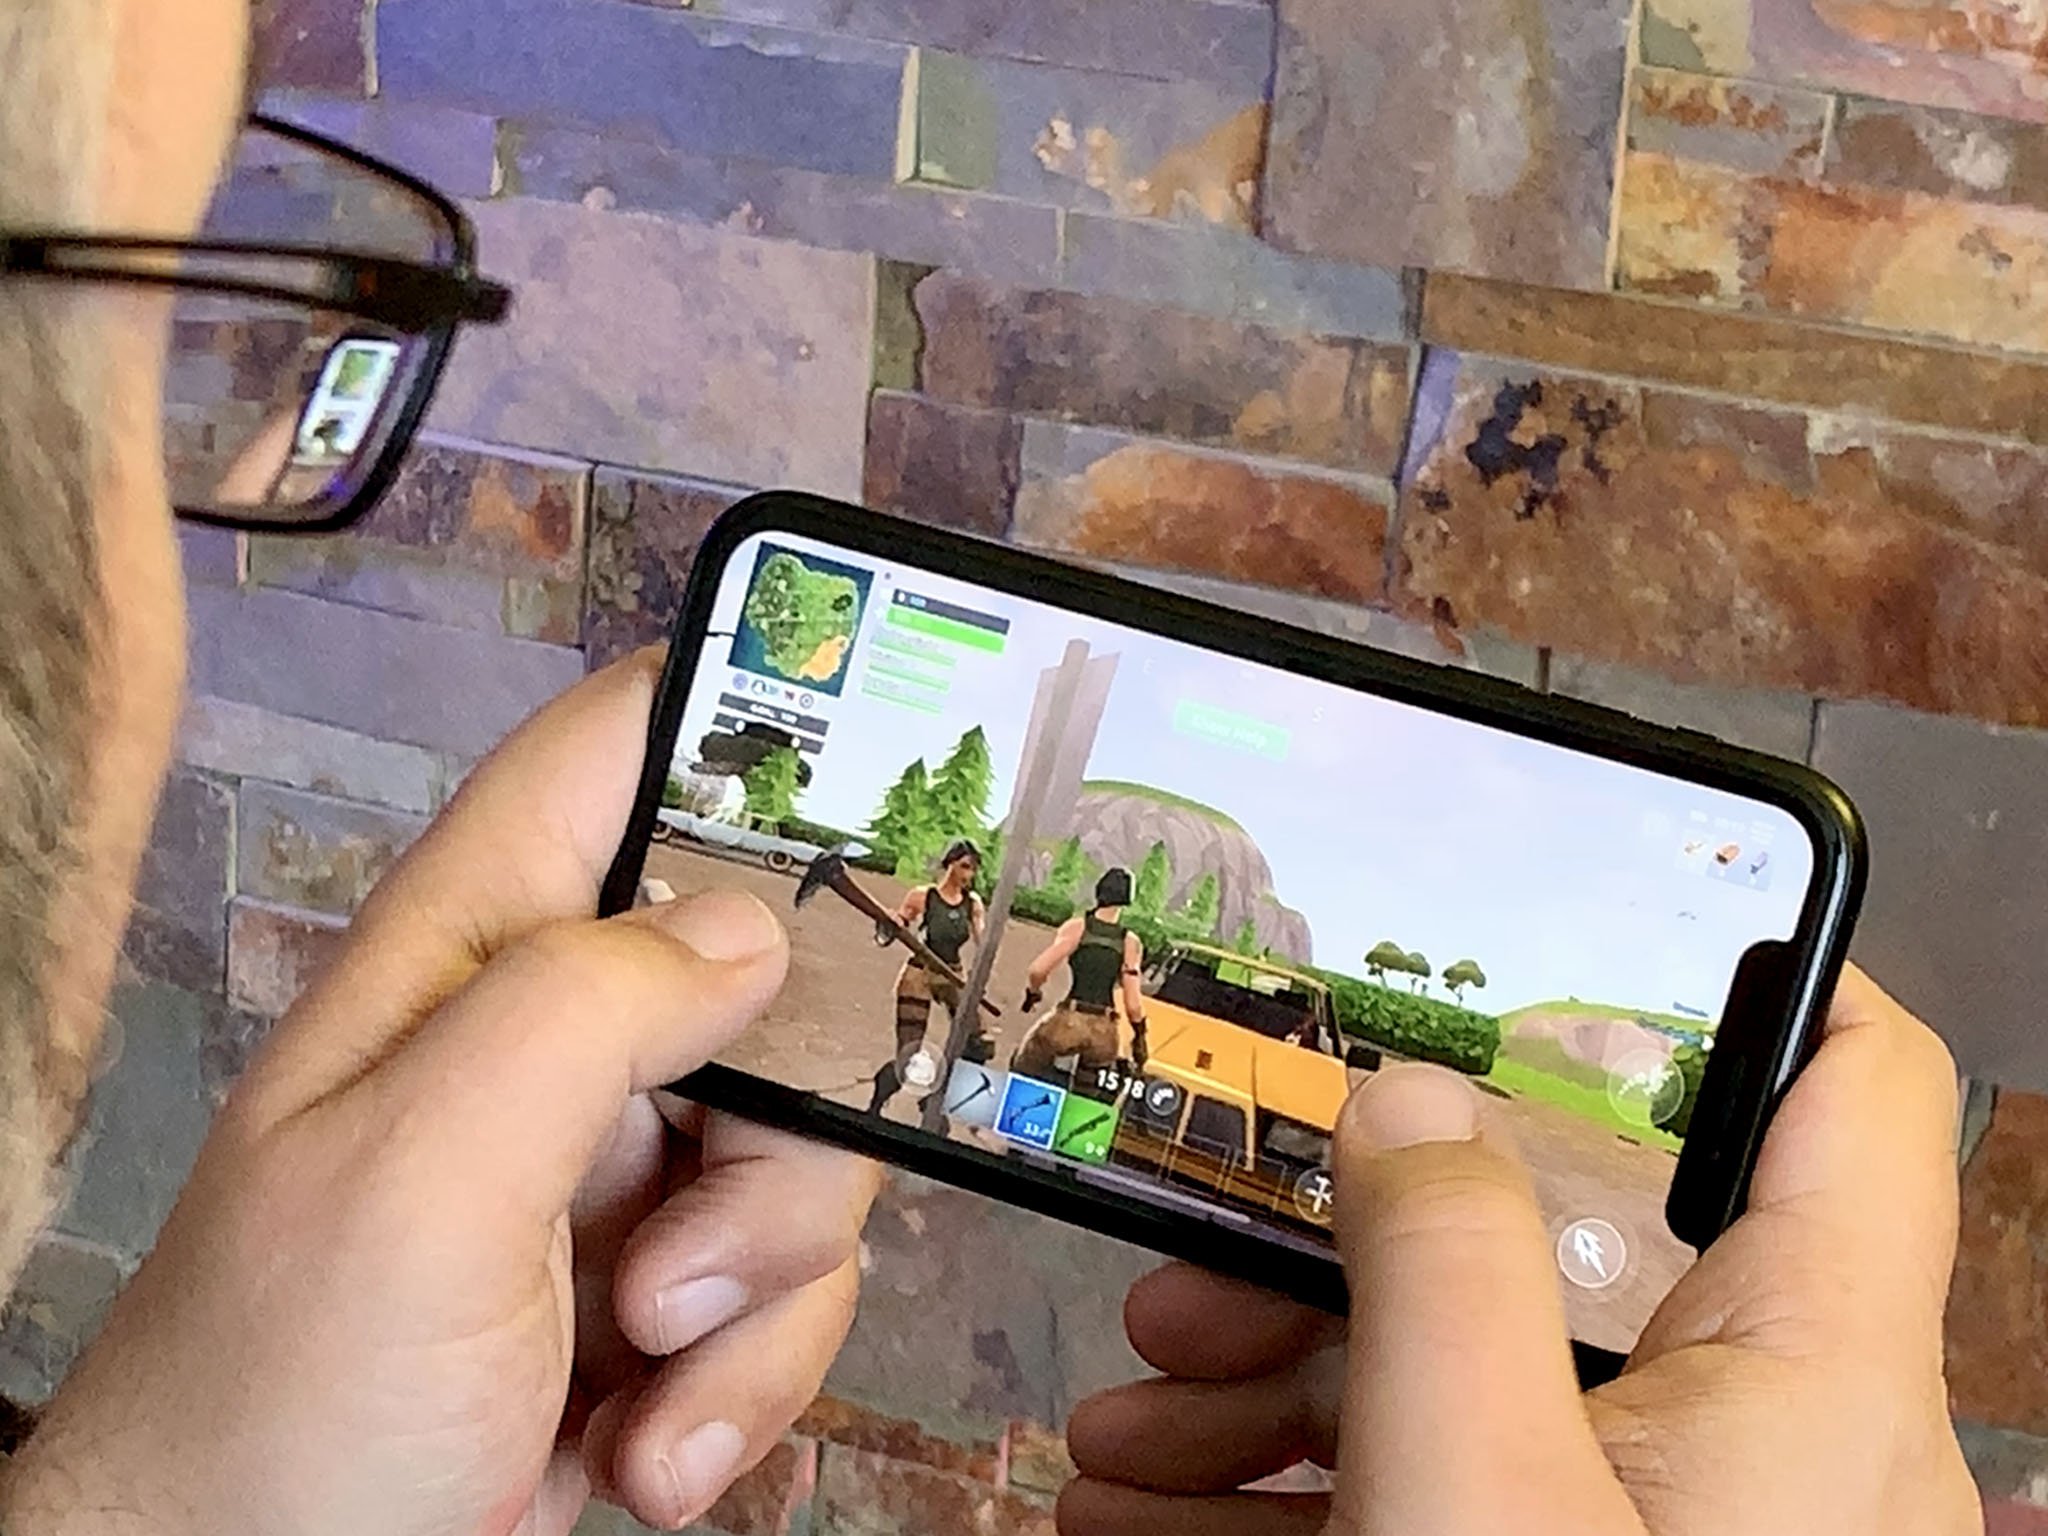 Fortnite returns to iPhone with clever workaround – here's how to